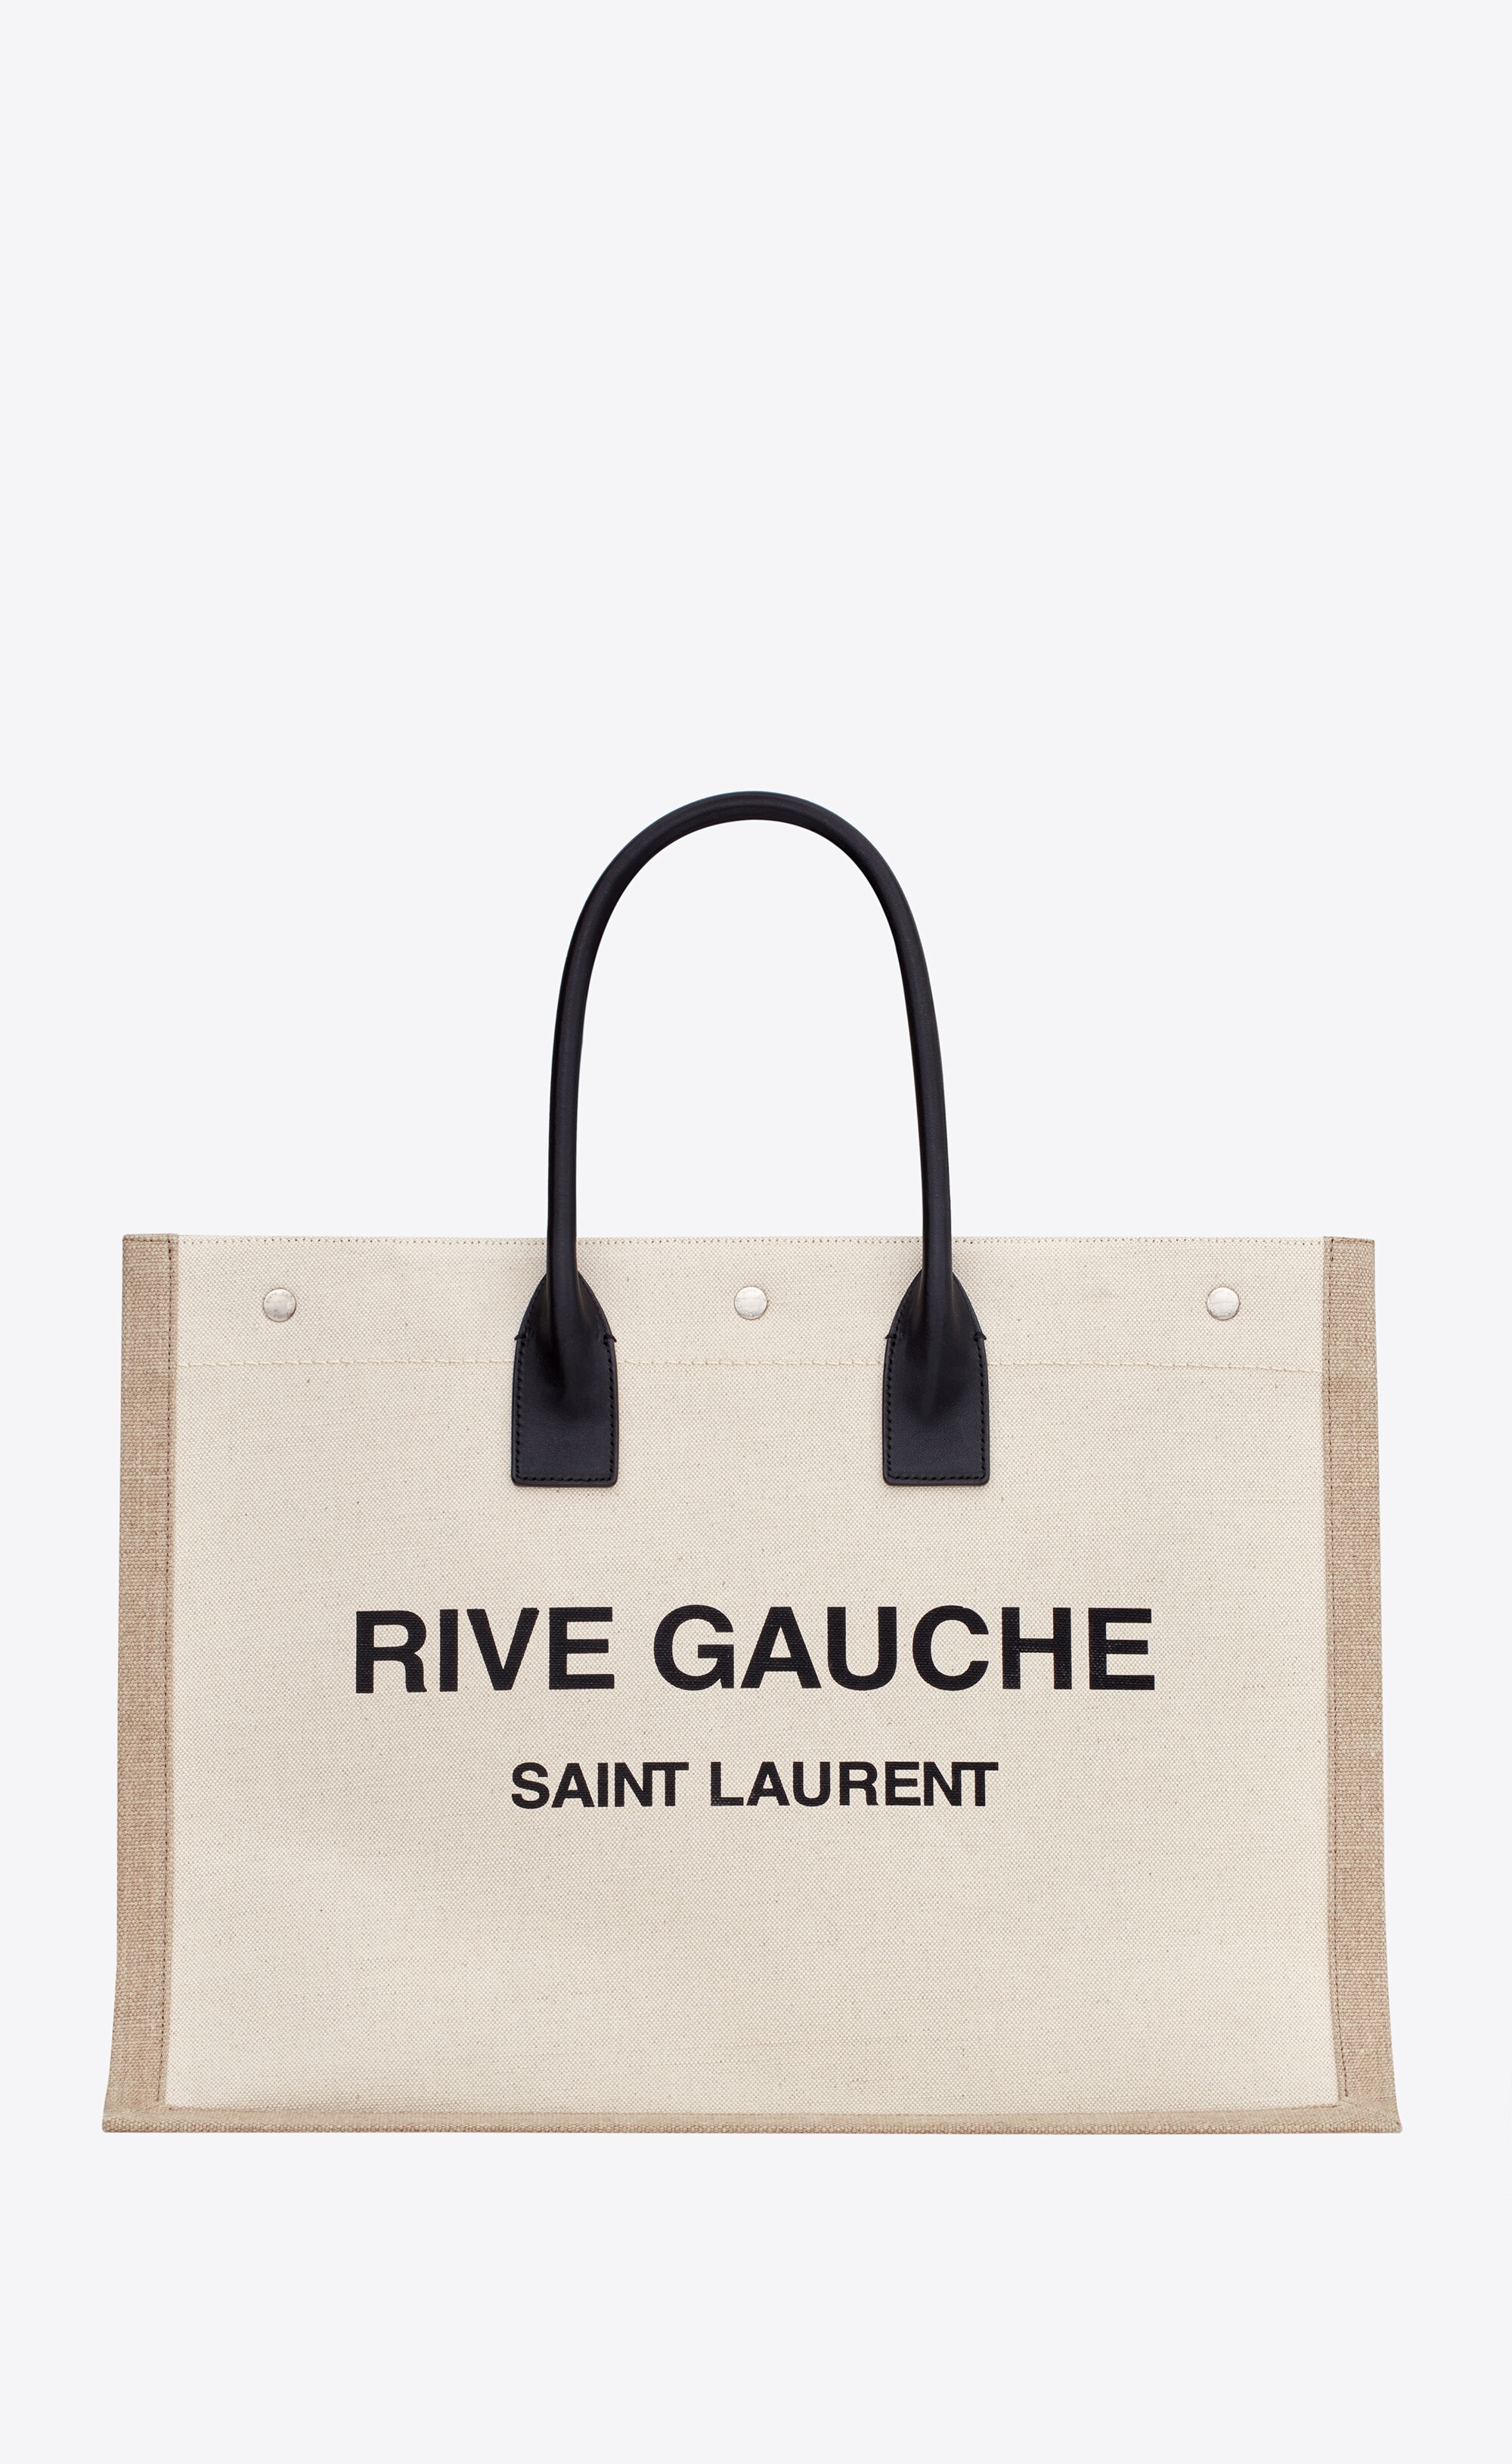 Saint Laurent UNIVERSITE North/South Foldable Tote Bag in Canvas and Smooth Leather - White - Men